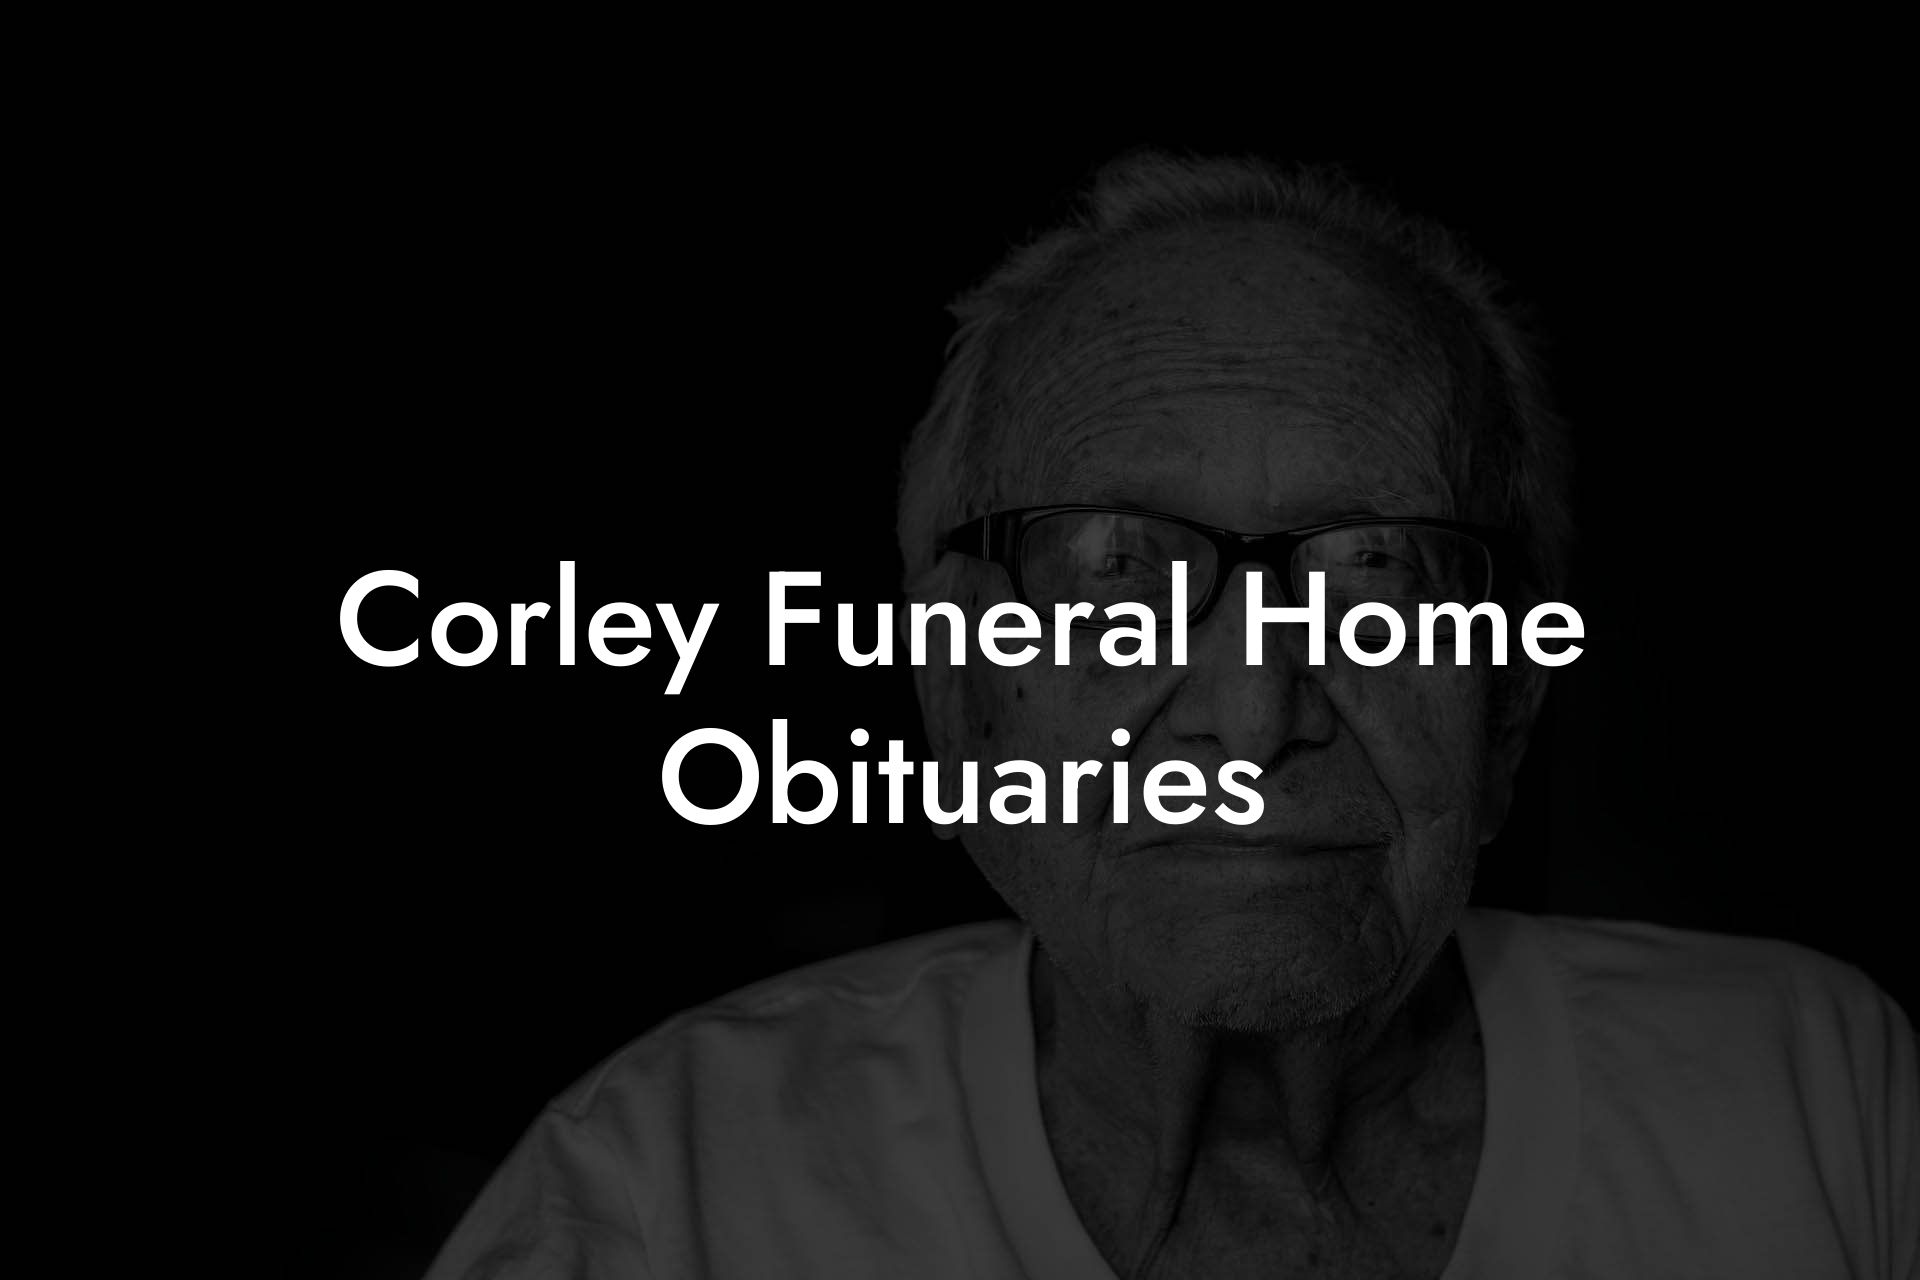 Corley Funeral Home Obituaries